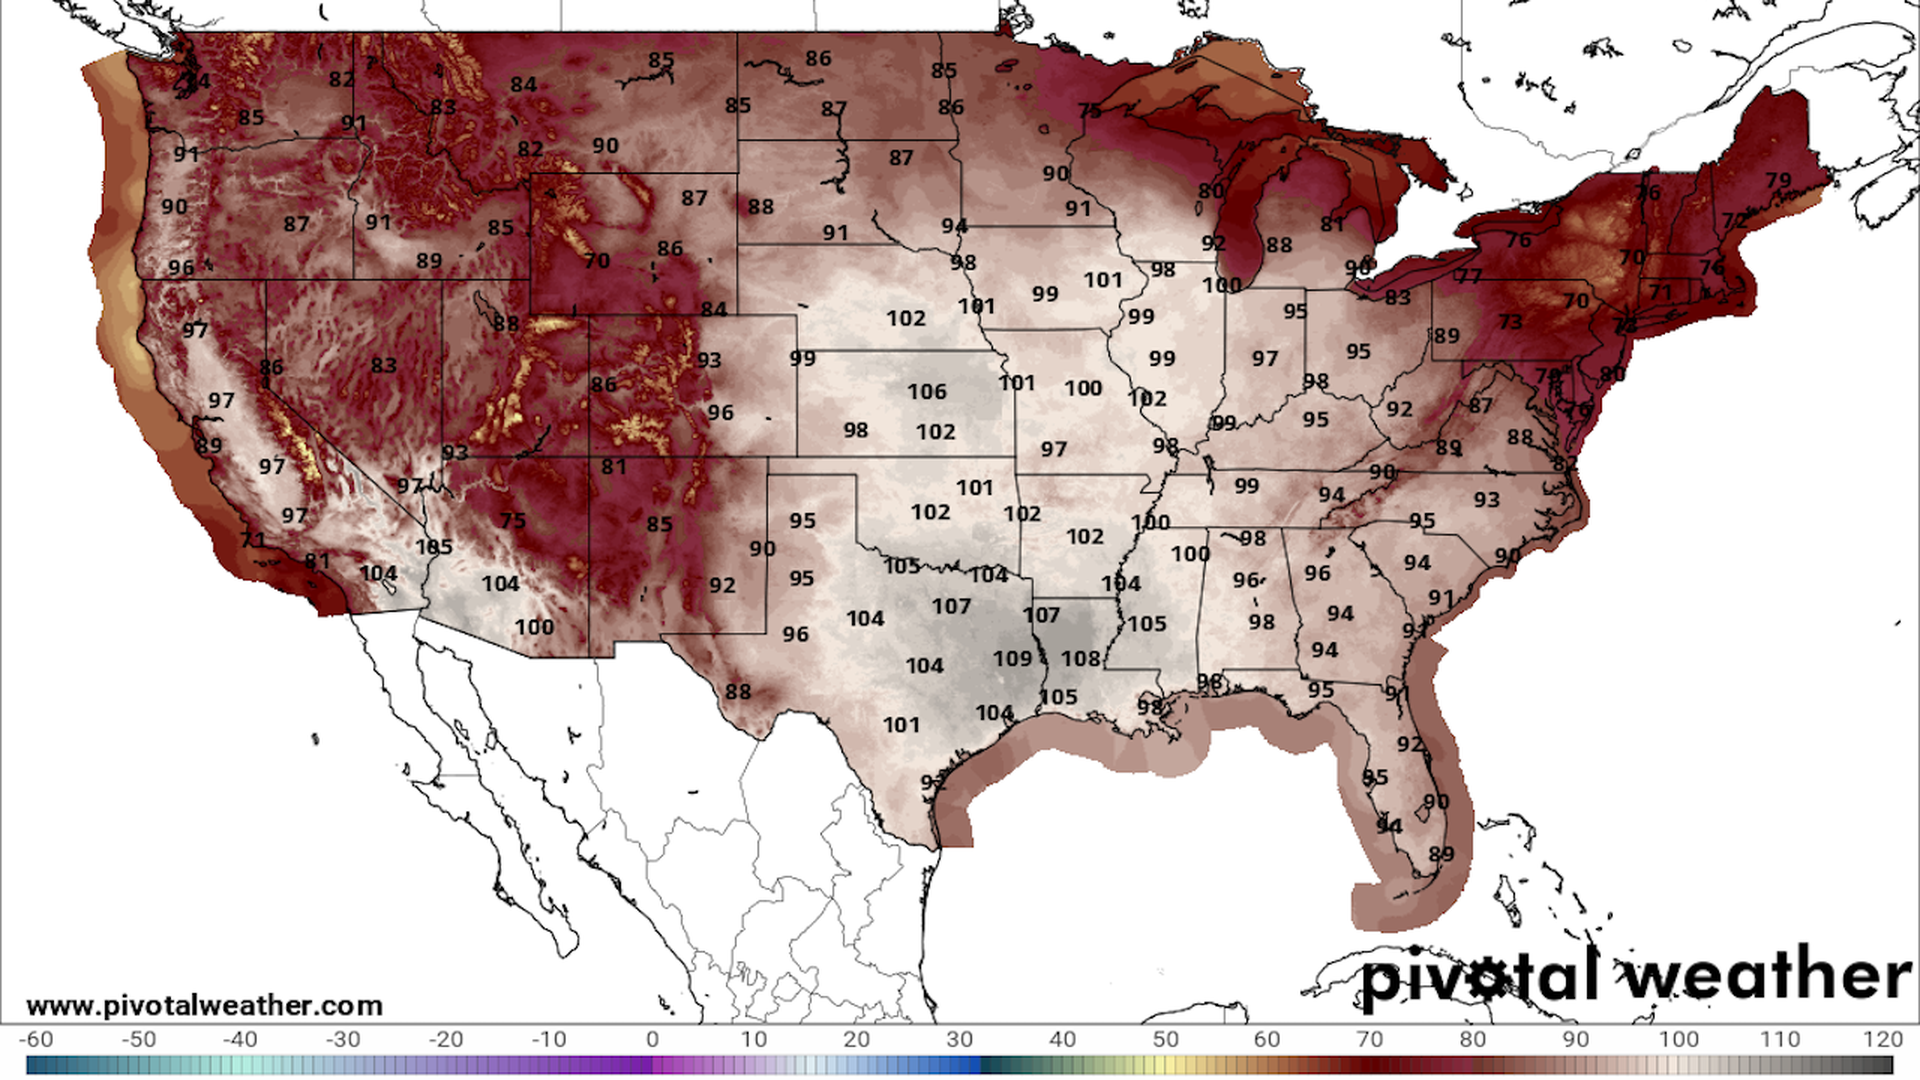 NWS forecast map for daily high temperatures on Aug. 24.